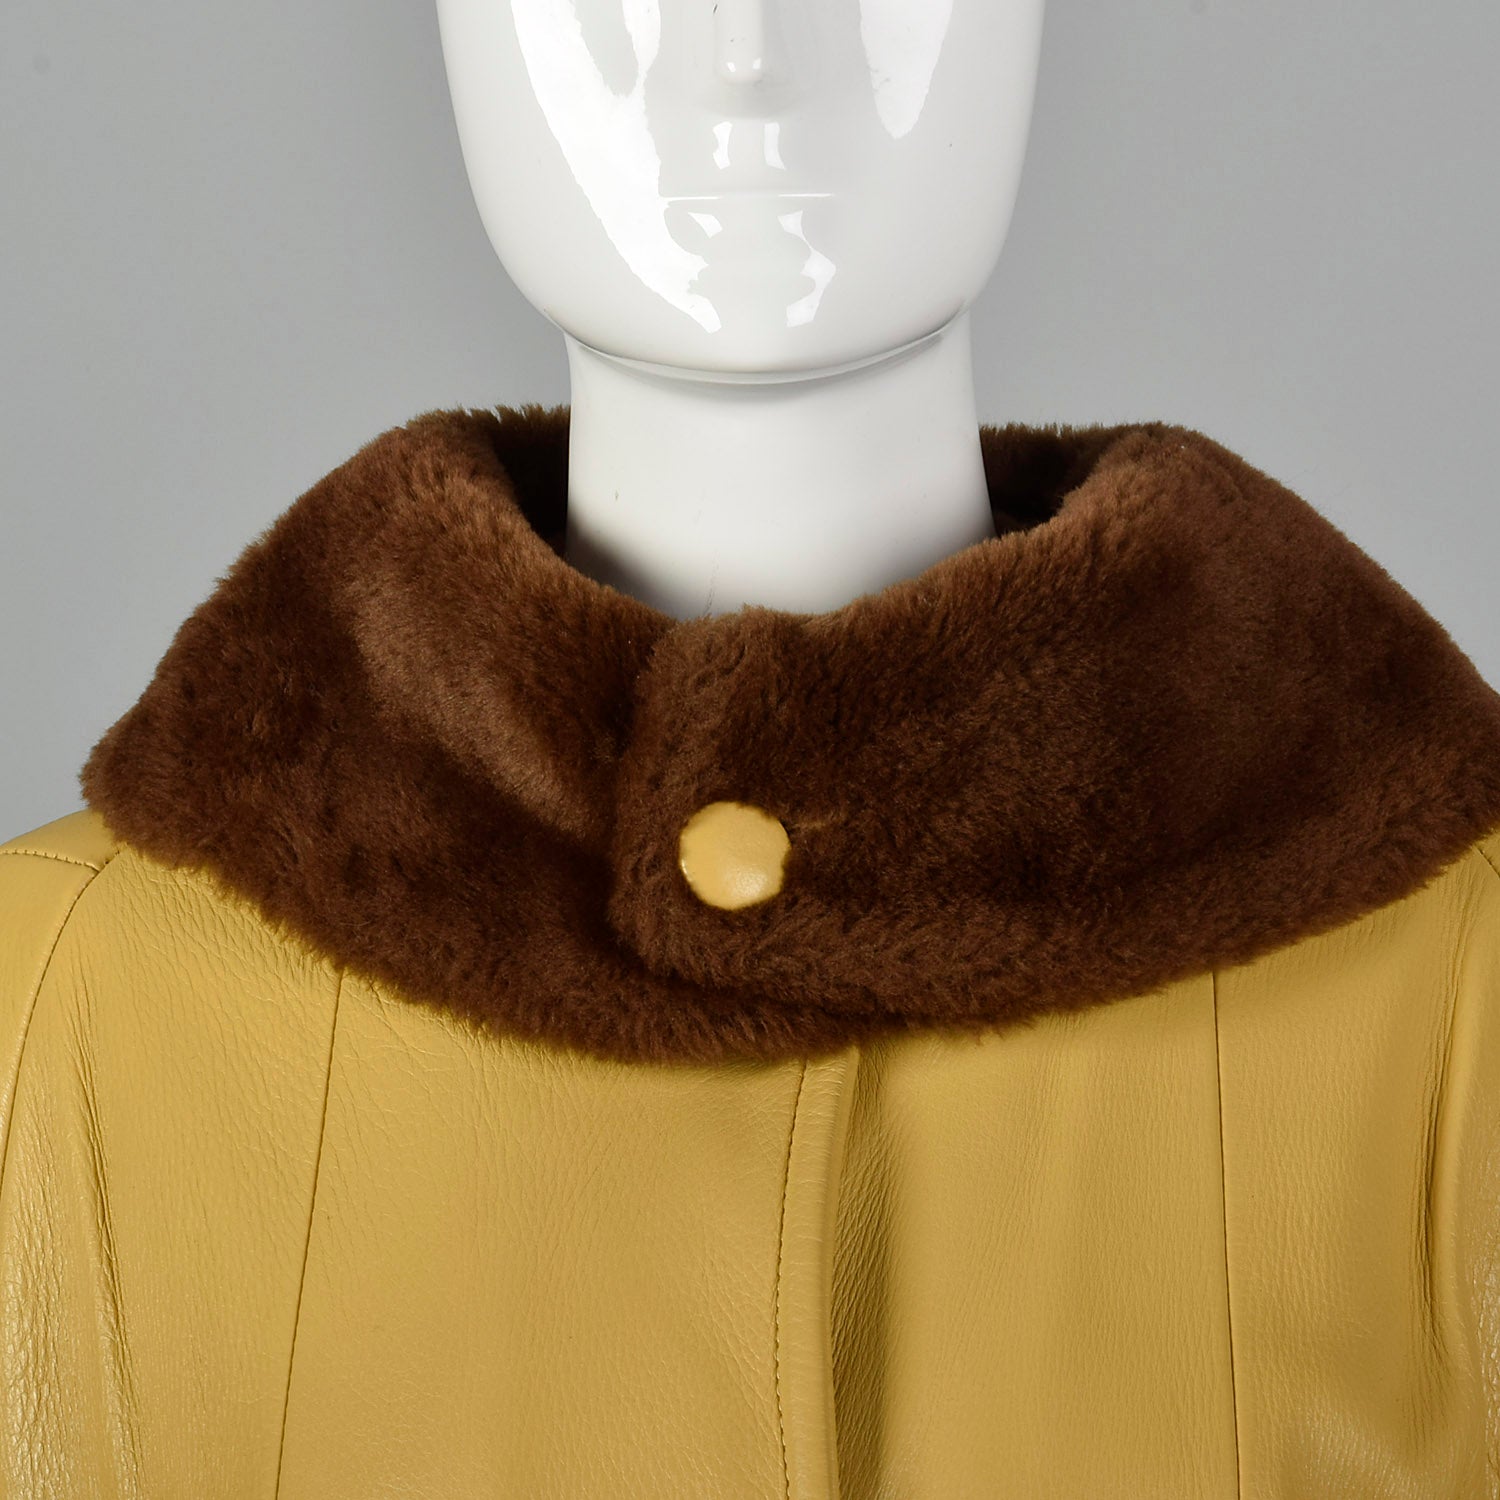 1960s Mustard Yellow Leather Jacket with Brown Faux Fur Trim